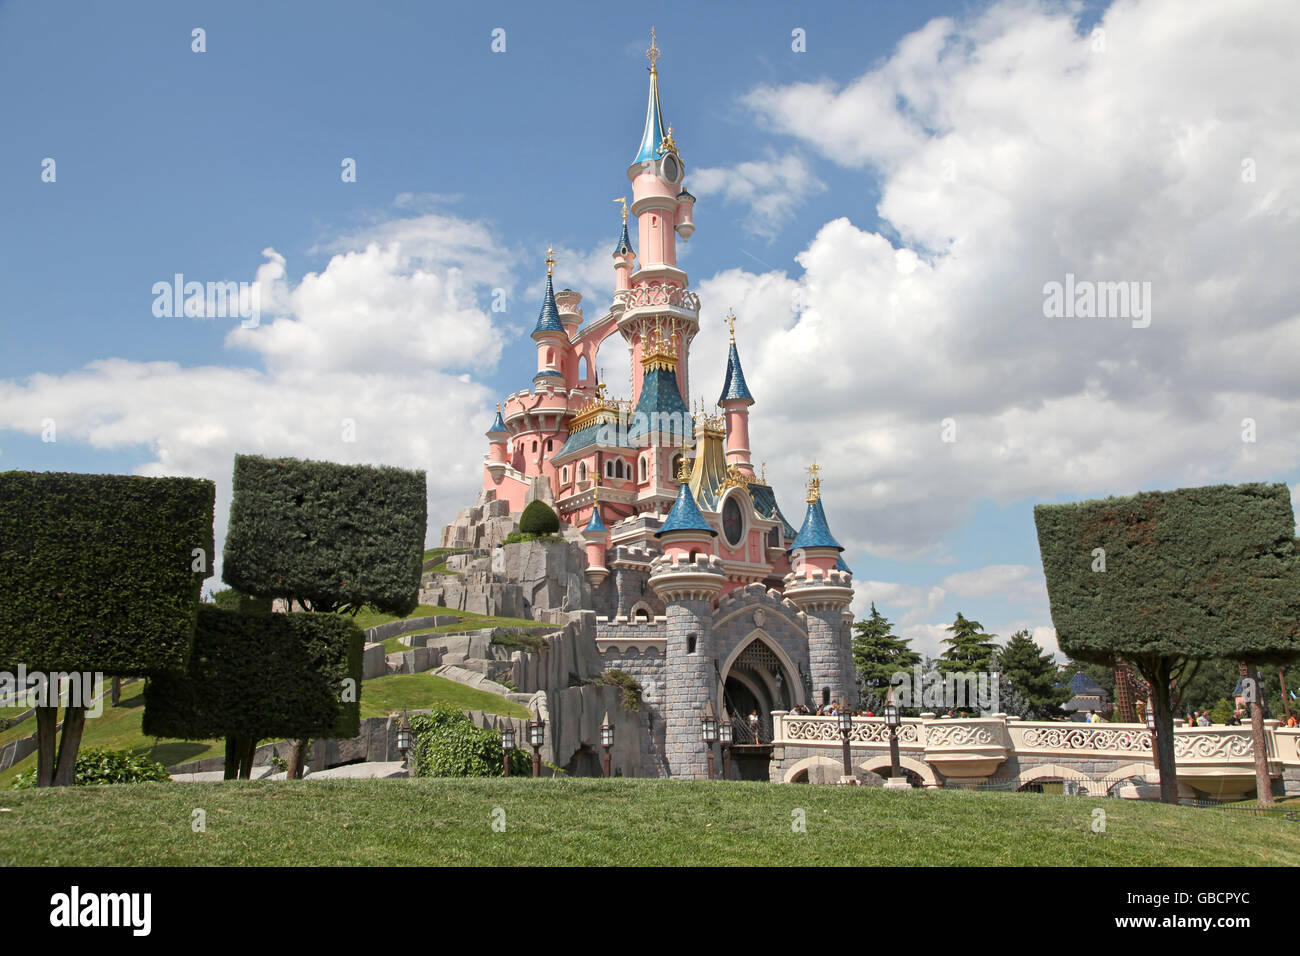 Marne La Vallee, France. July 1st, 2011. The Disneyland Paris Castle freshly painted. Lucy Clark/Alamy Live News Stock Photo